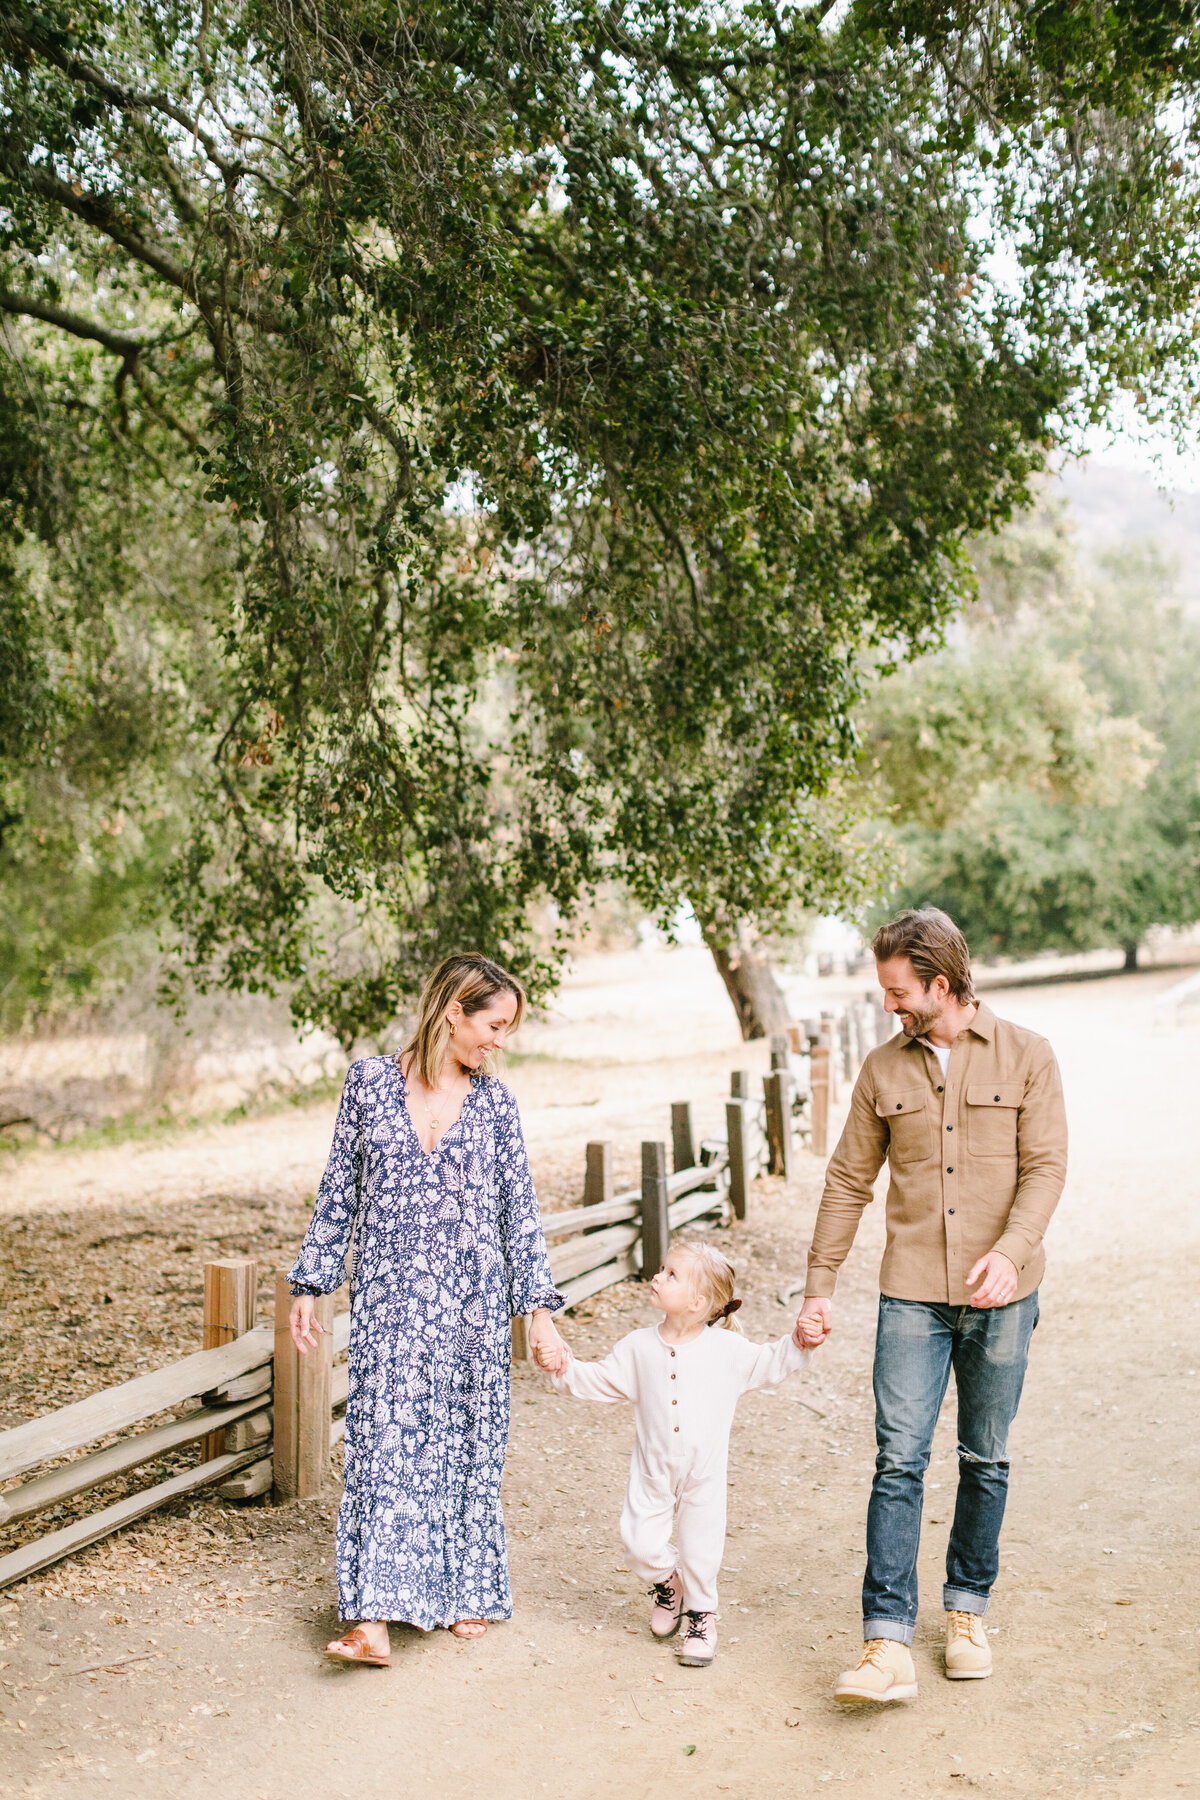 Best California and Texas Family Photographer-Jodee Debes Photography-295